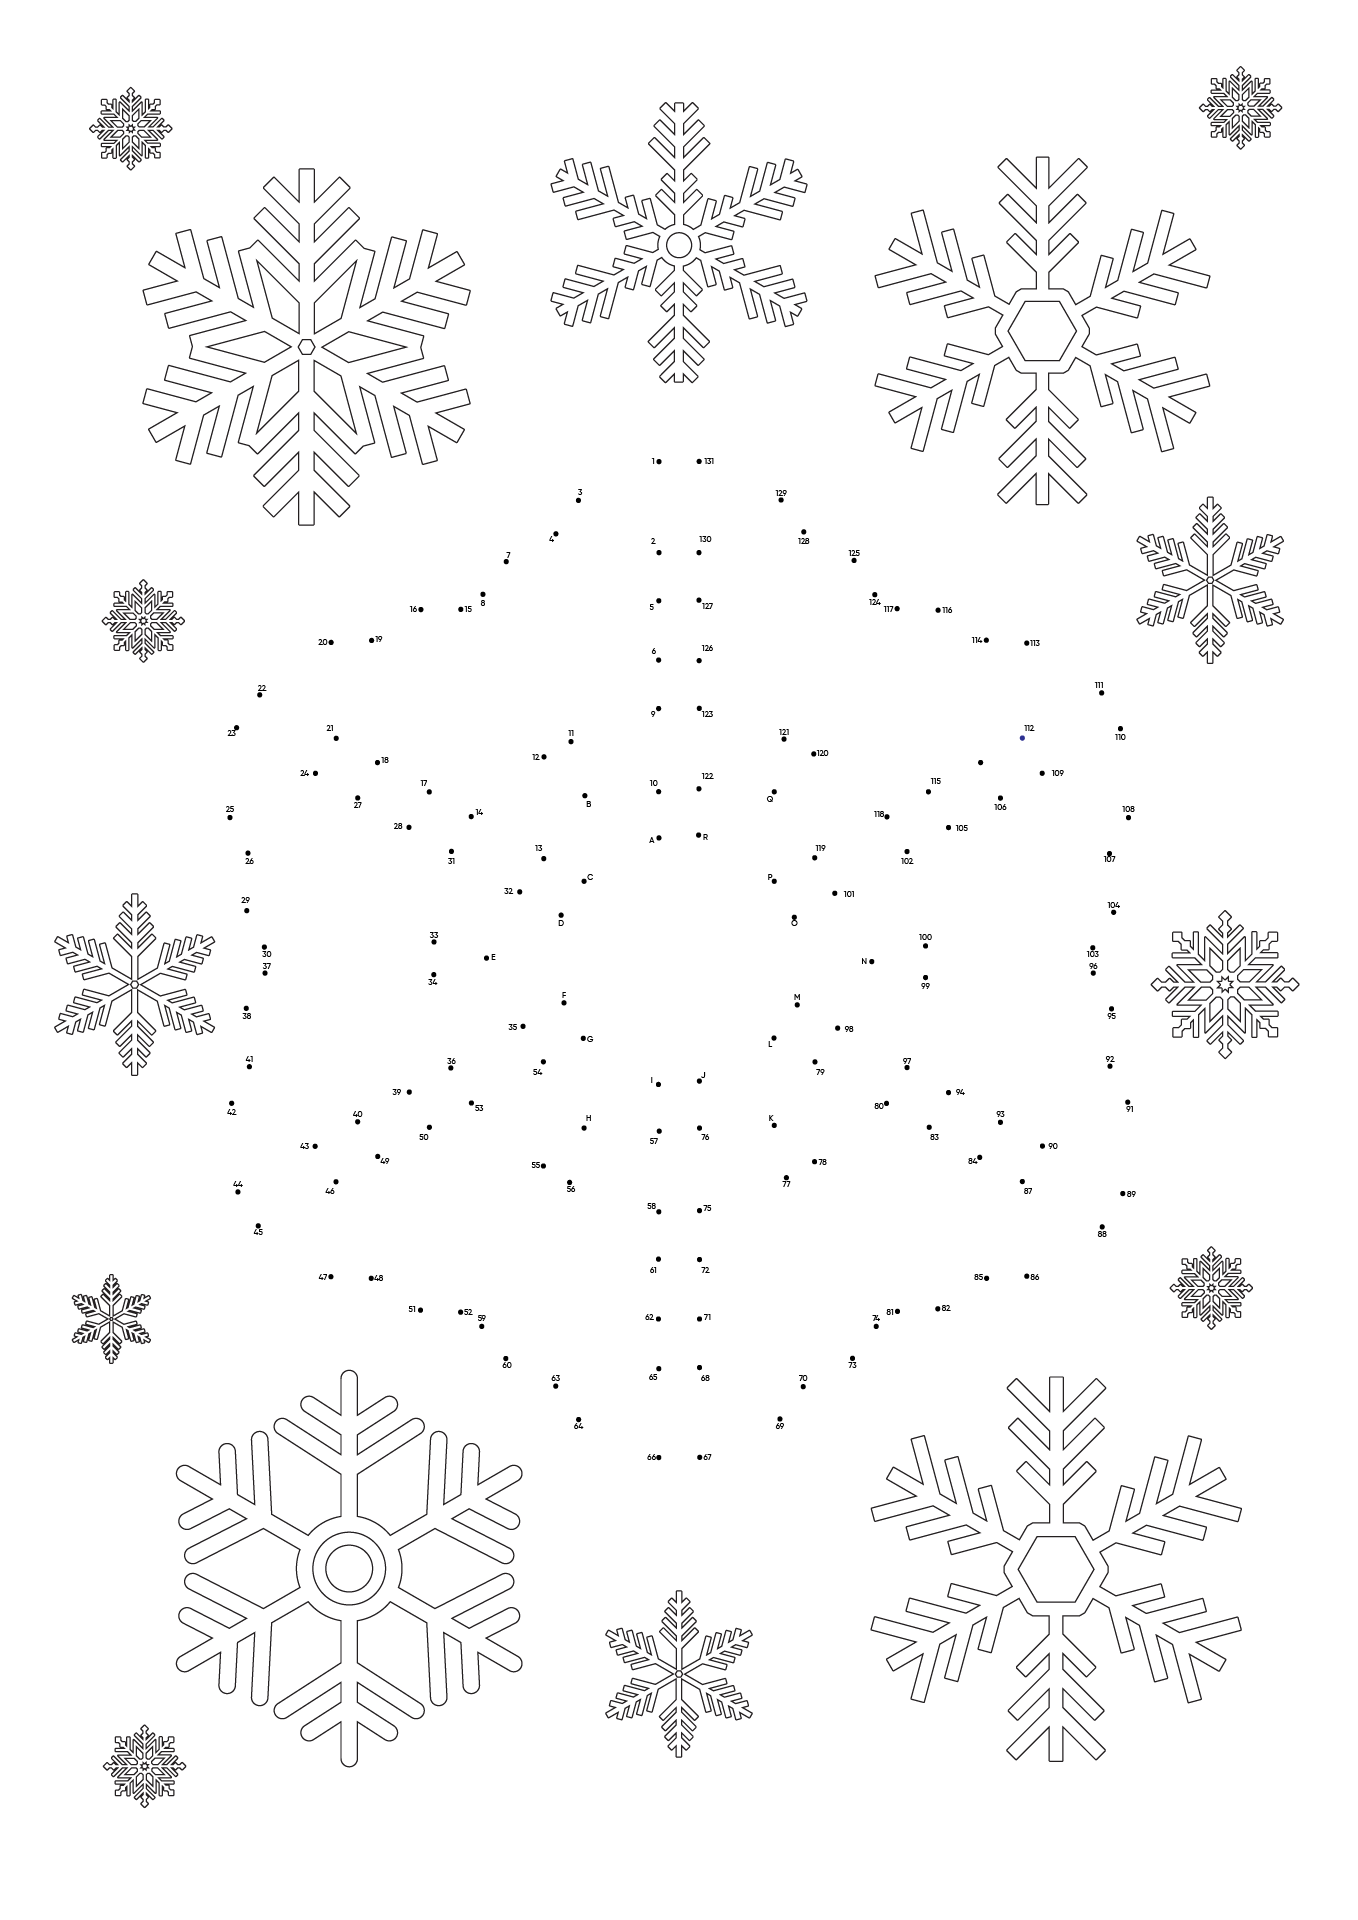 Snowflake Connect the Dots Worksheets Image